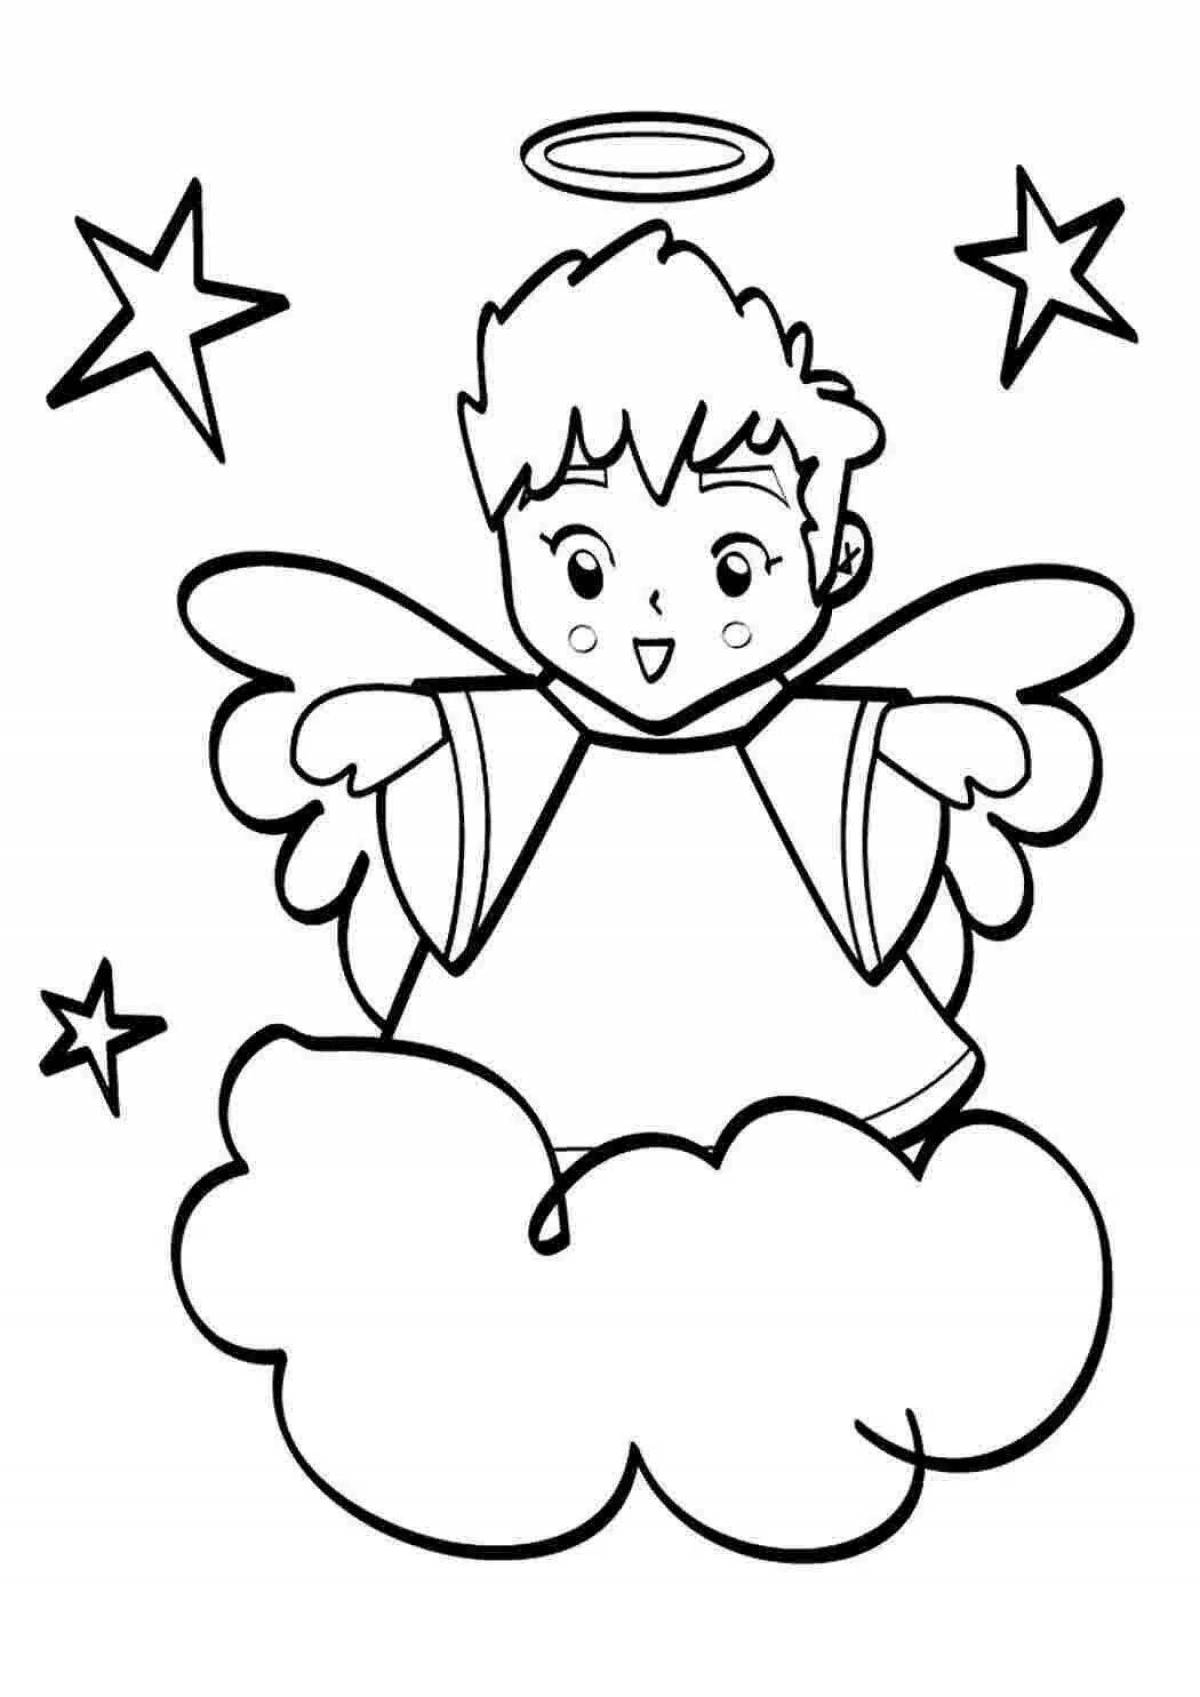 Charming angel coloring book for kids